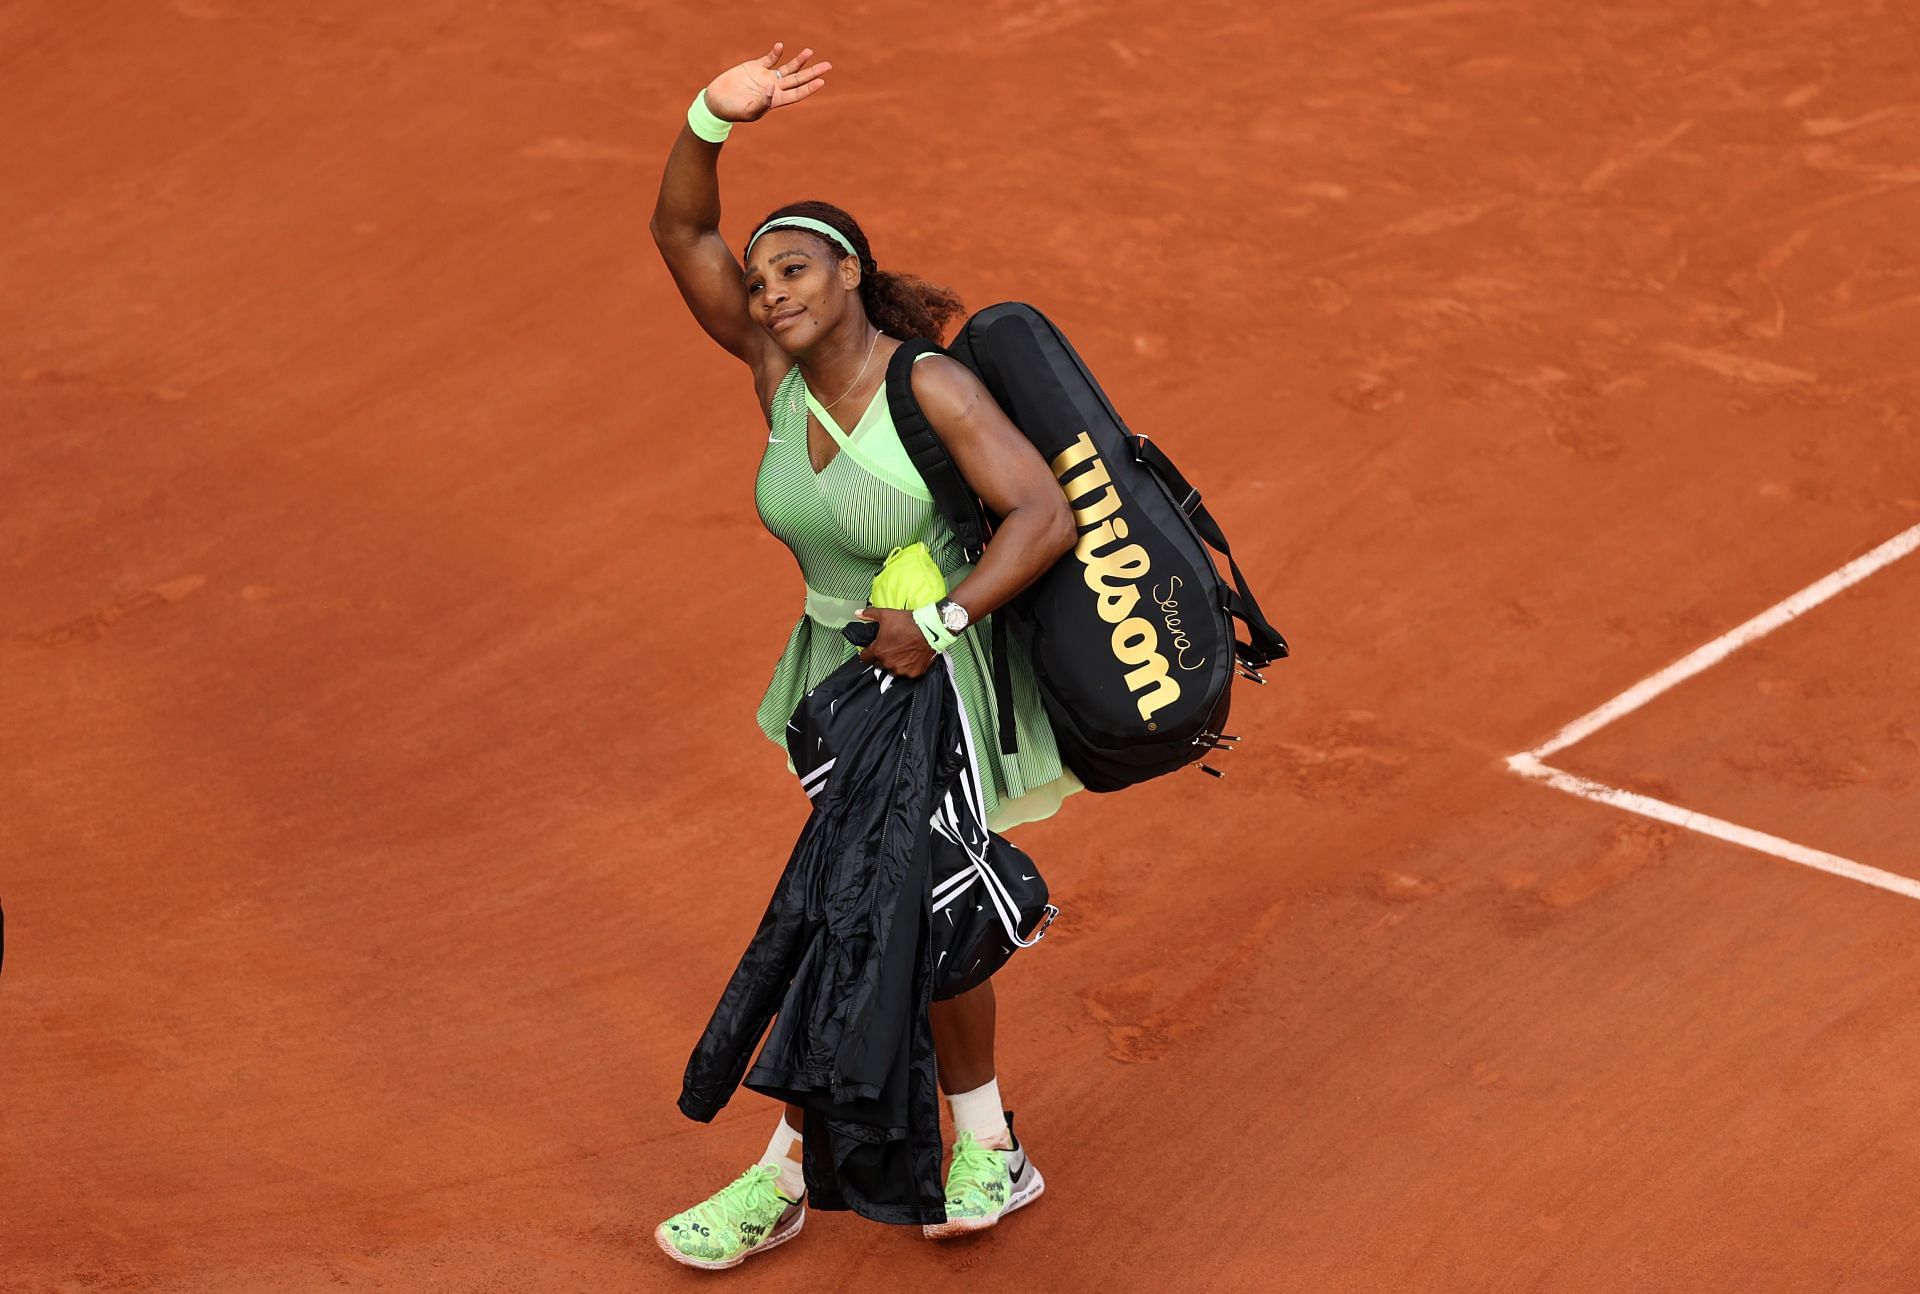 Serena Williams is yet to play a match since Wimbledon last year